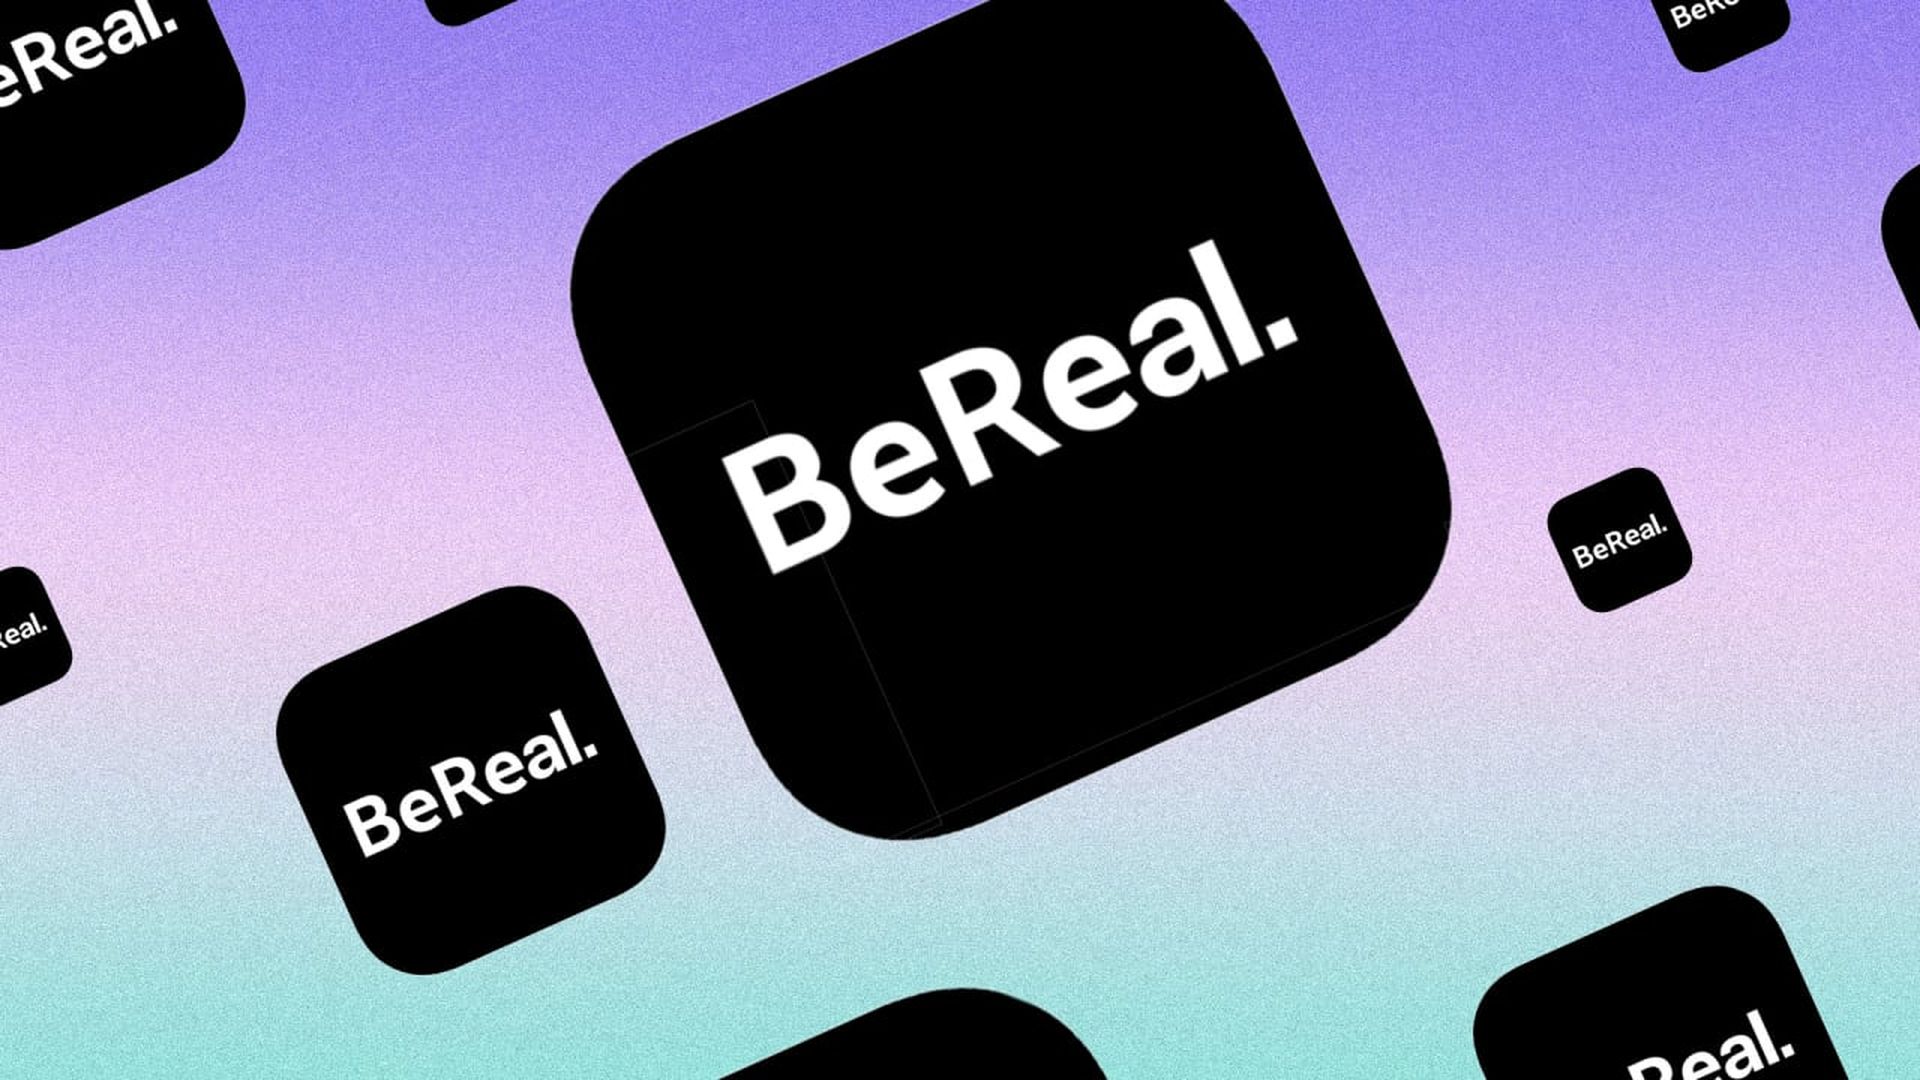 Today, we will be covering where are friend requests on BeReal and how you can add someone as your friend, so you can enjoy the app with your loved ones.